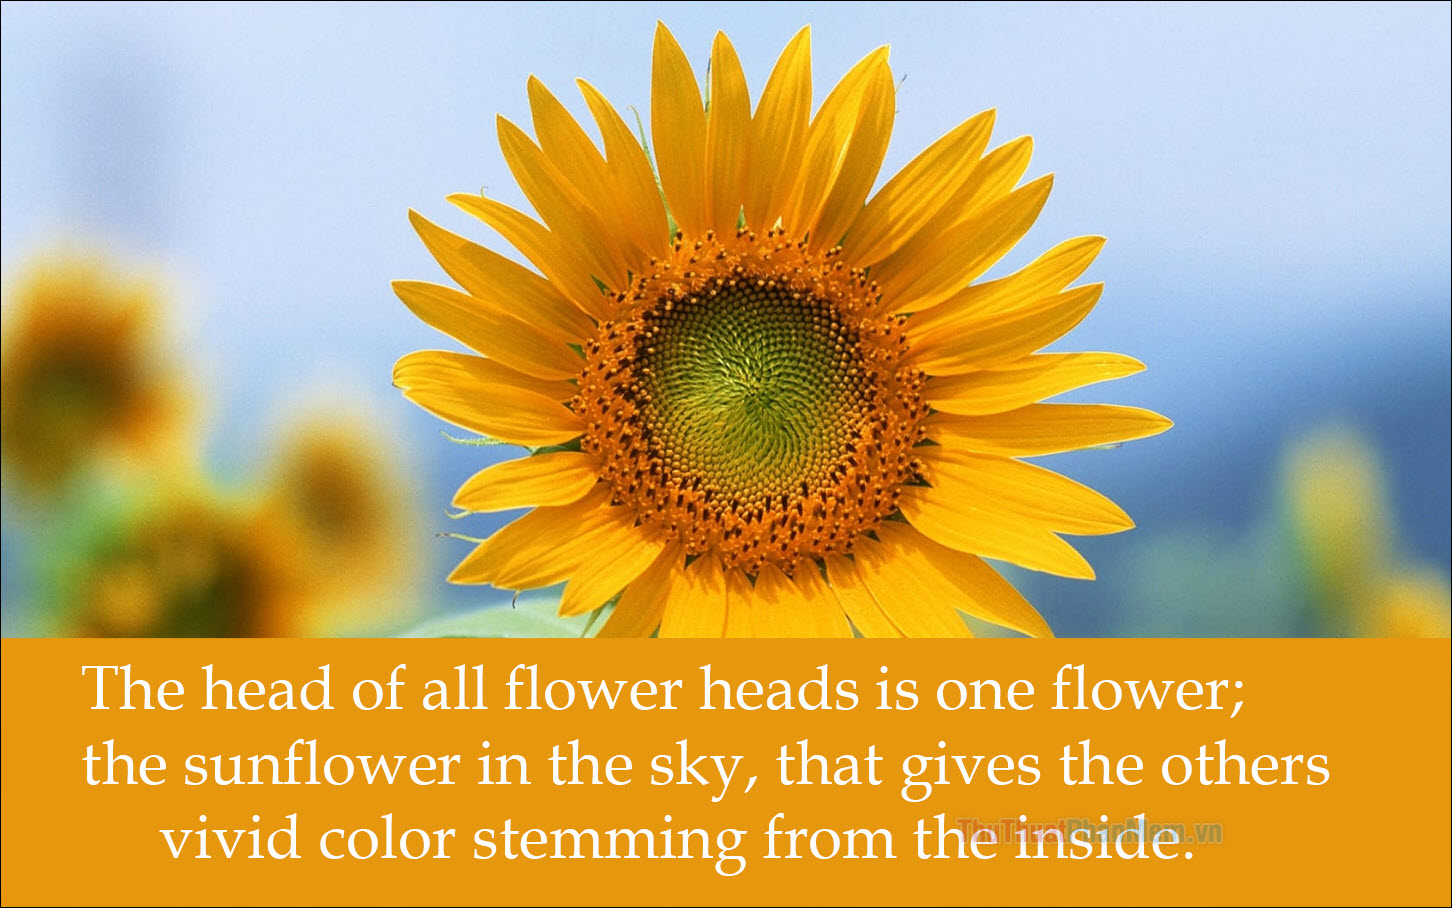 The head of all flower heads is one flower; the sunflower in the sky, that gives the others vivid color stemming from the inside